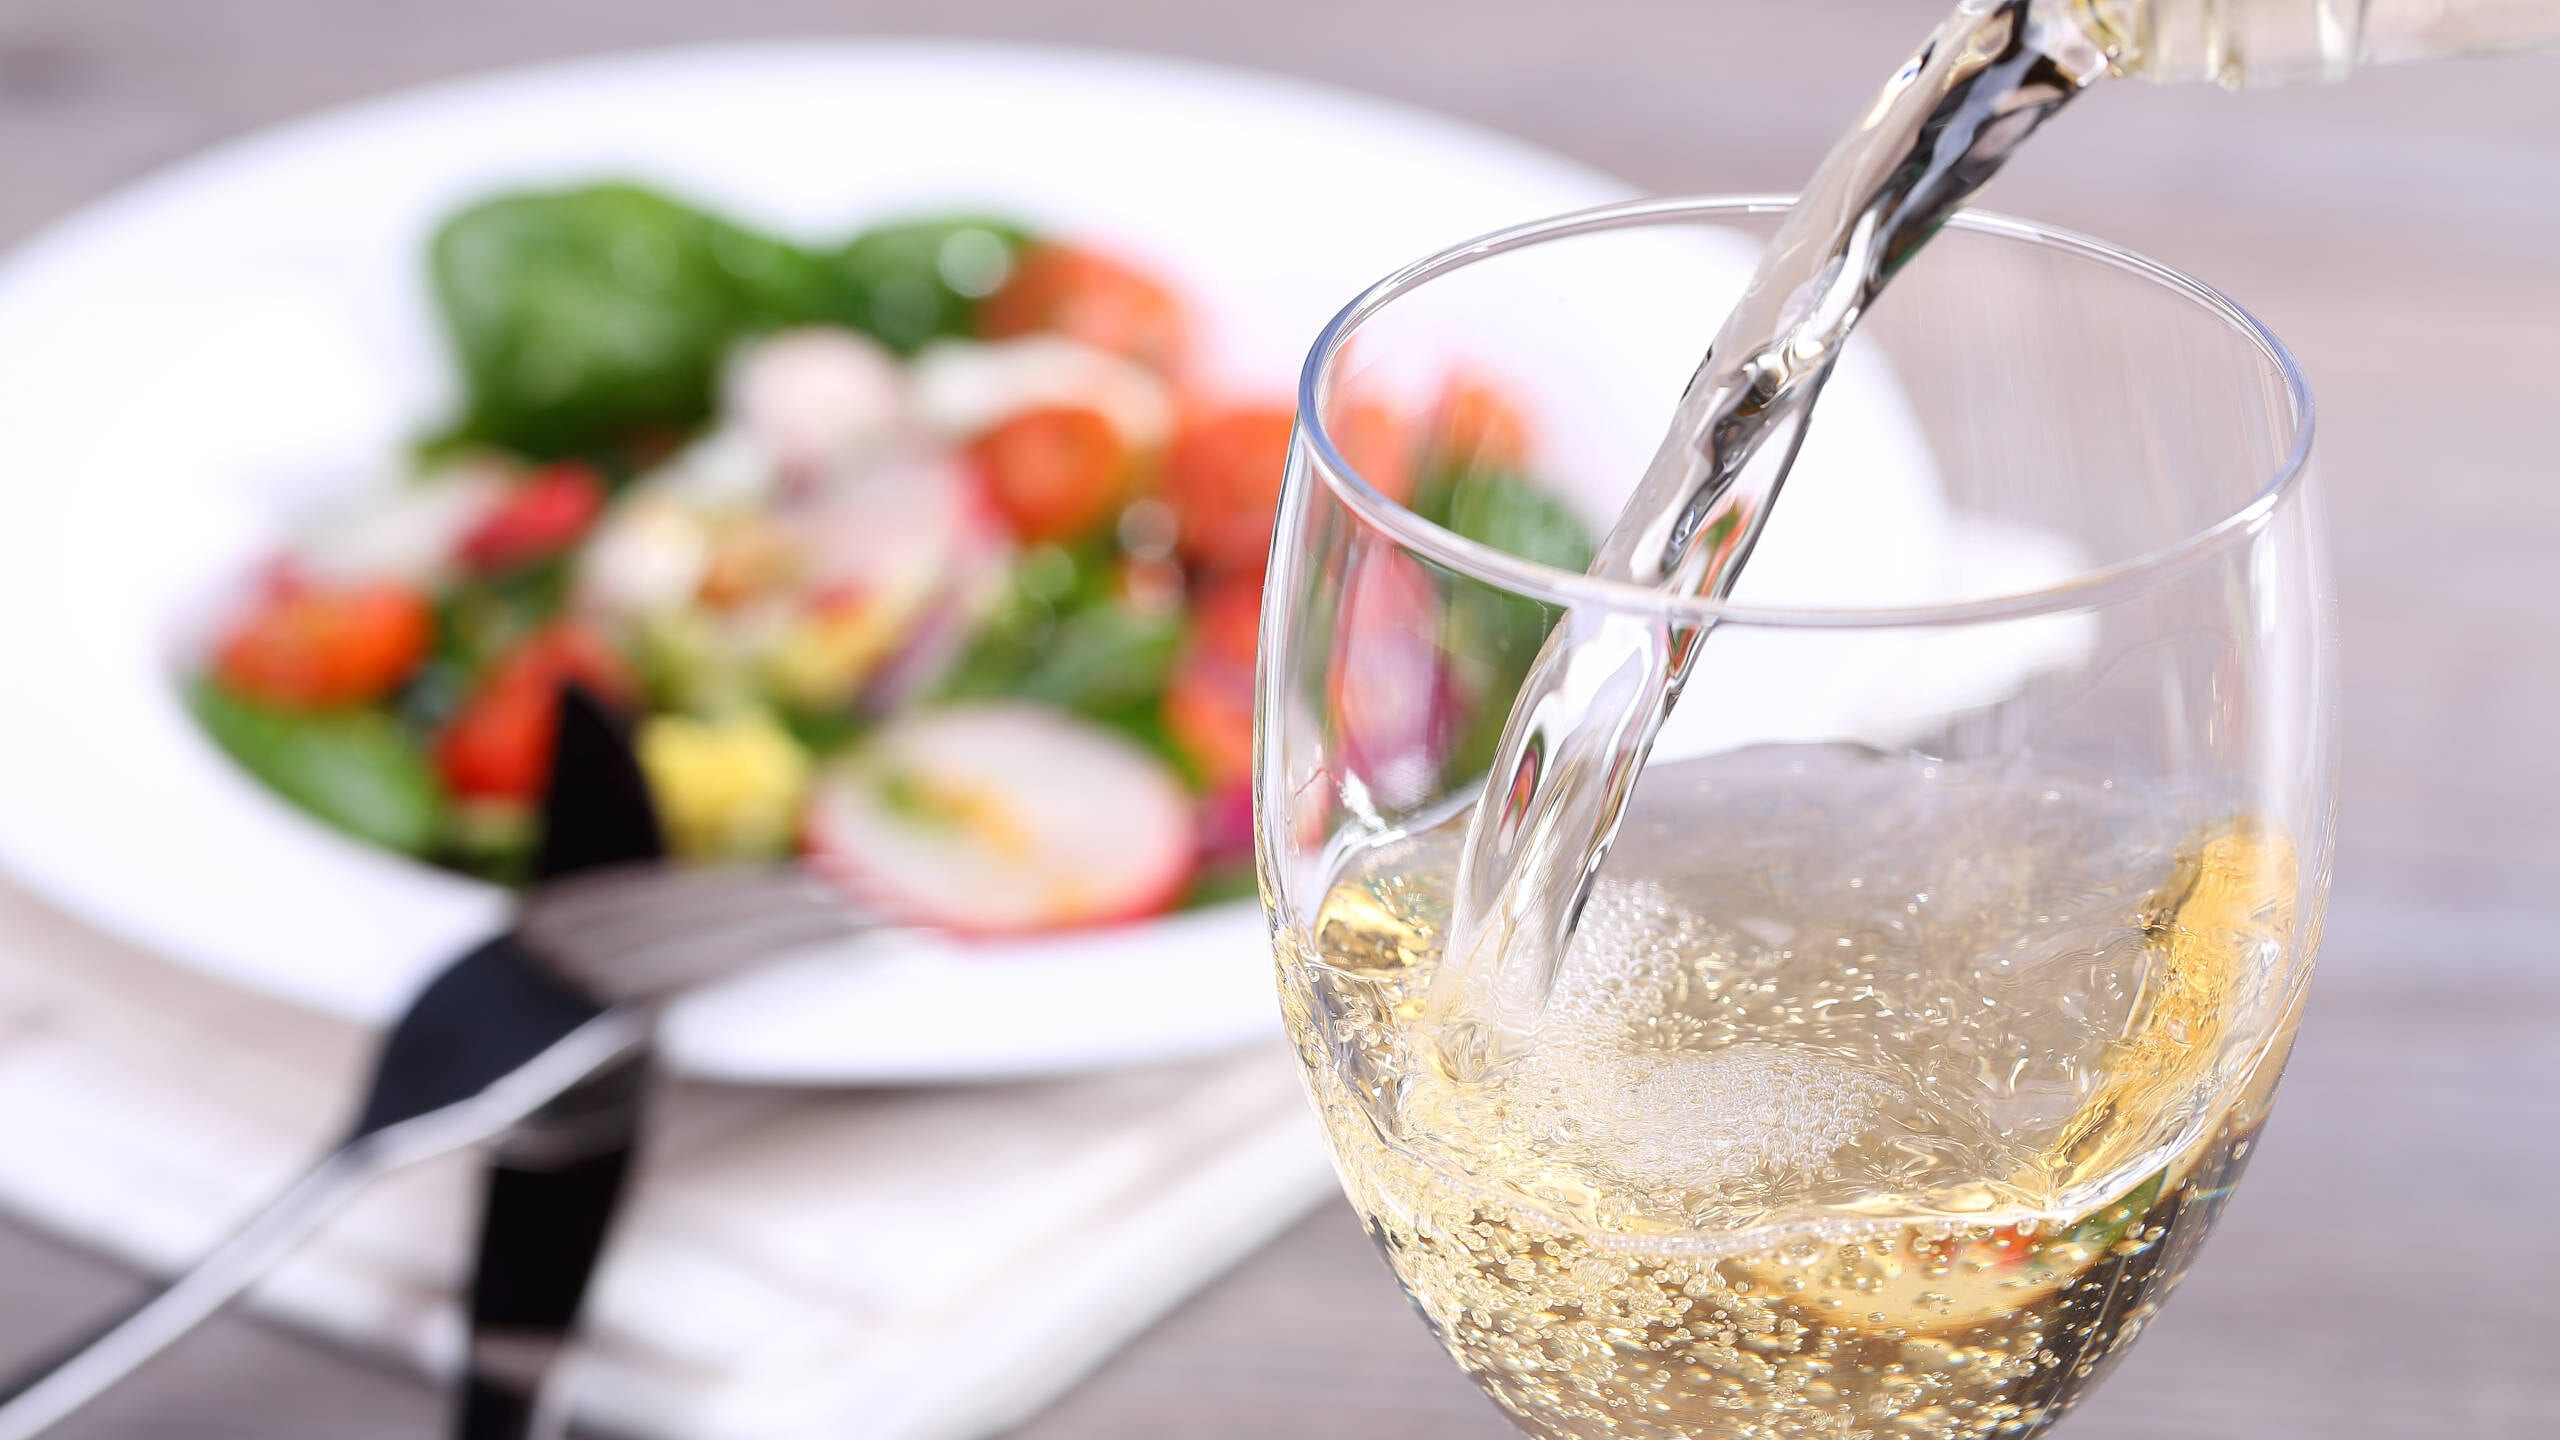 Pouring white wine into glass with plate of salad in the background